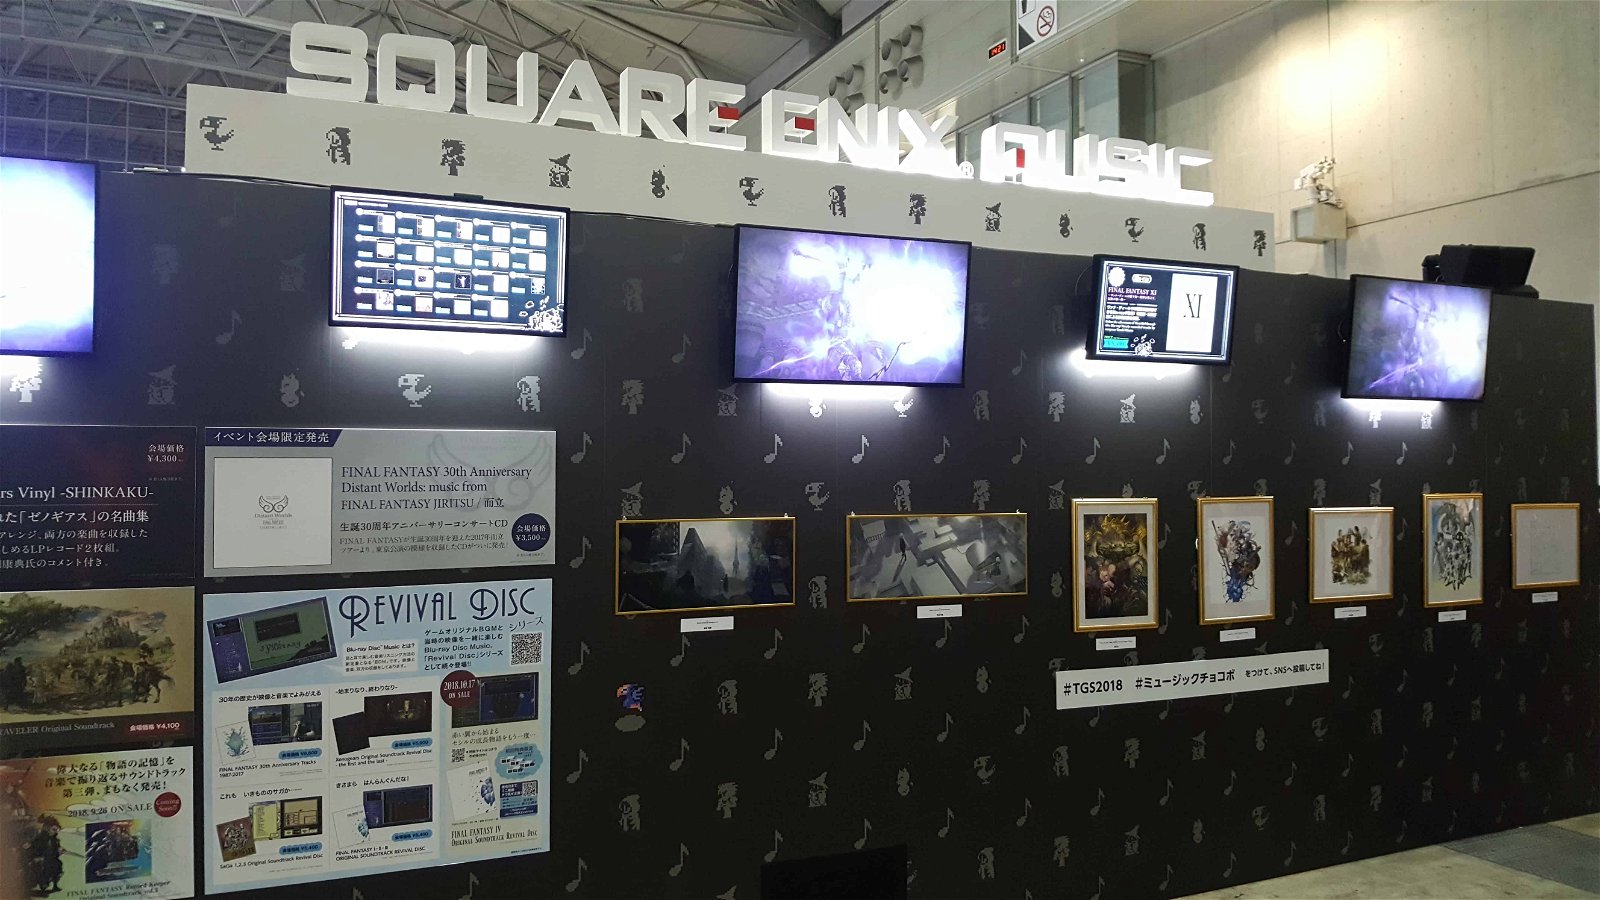 Square Enix Music At Tgs 2018